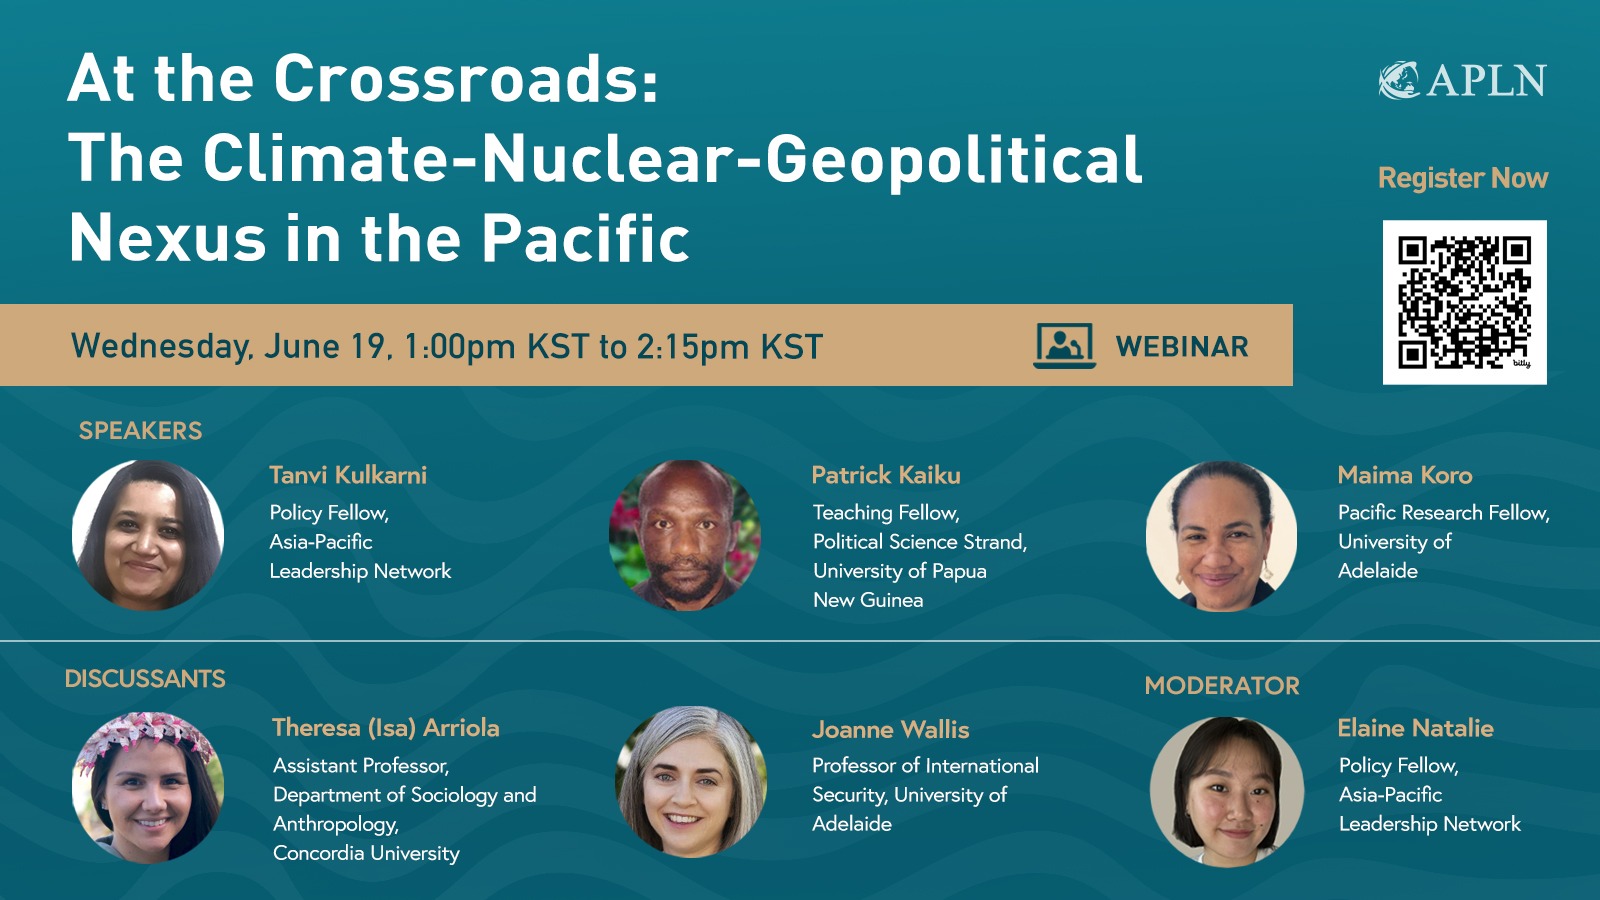 At the Crossroads: The Climate-Nuclear-Geopolitical Nexus in the Pacific